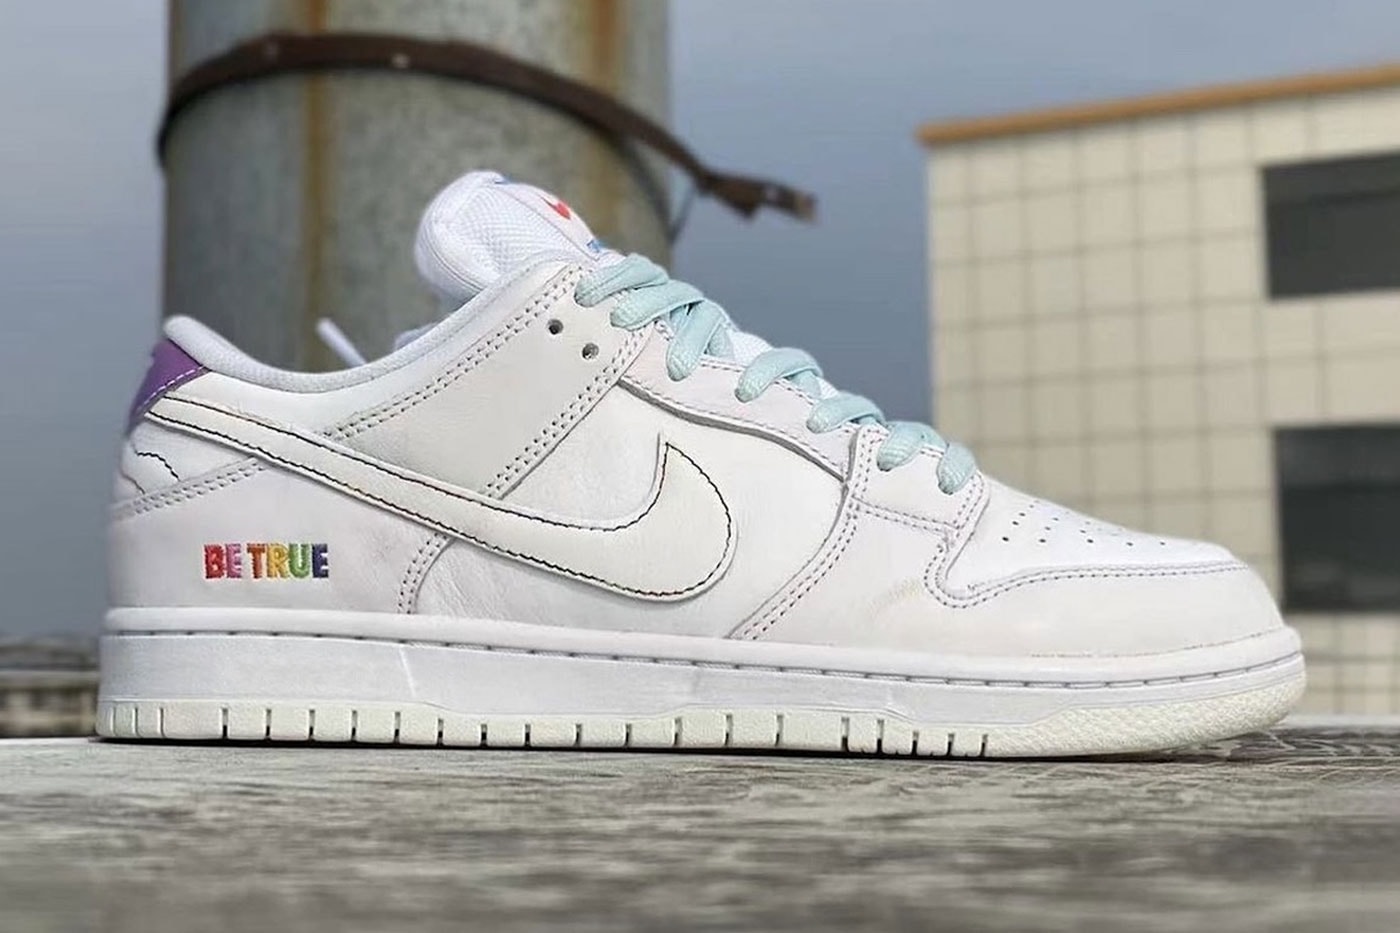 First Look at the Nike SB Dunk Low Be True